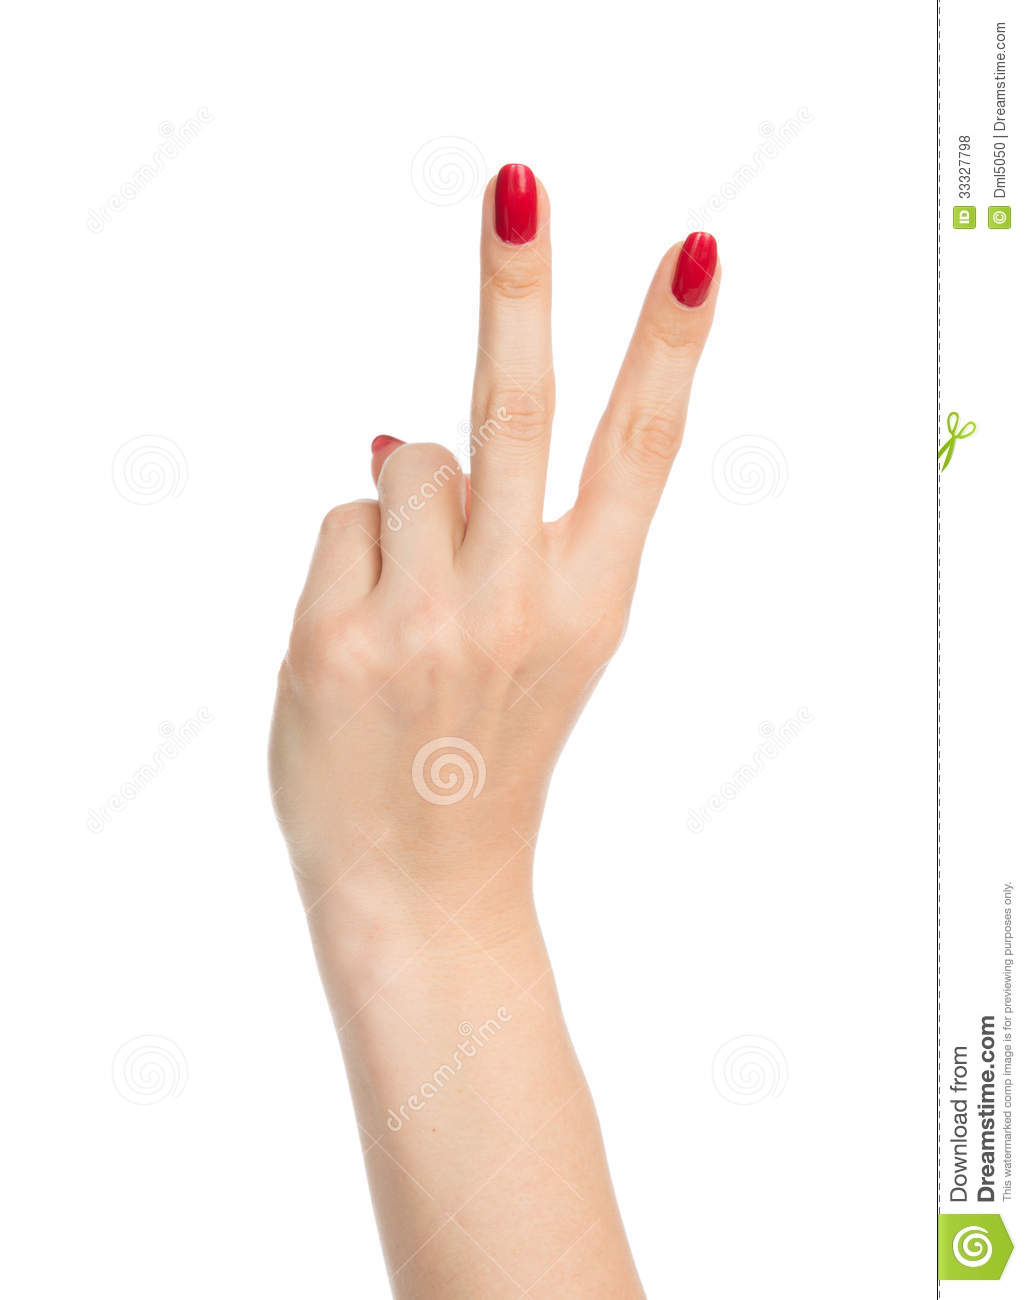 Hand With Two Fingers Up In The Peace Or Victory Symbol The Sign For V    